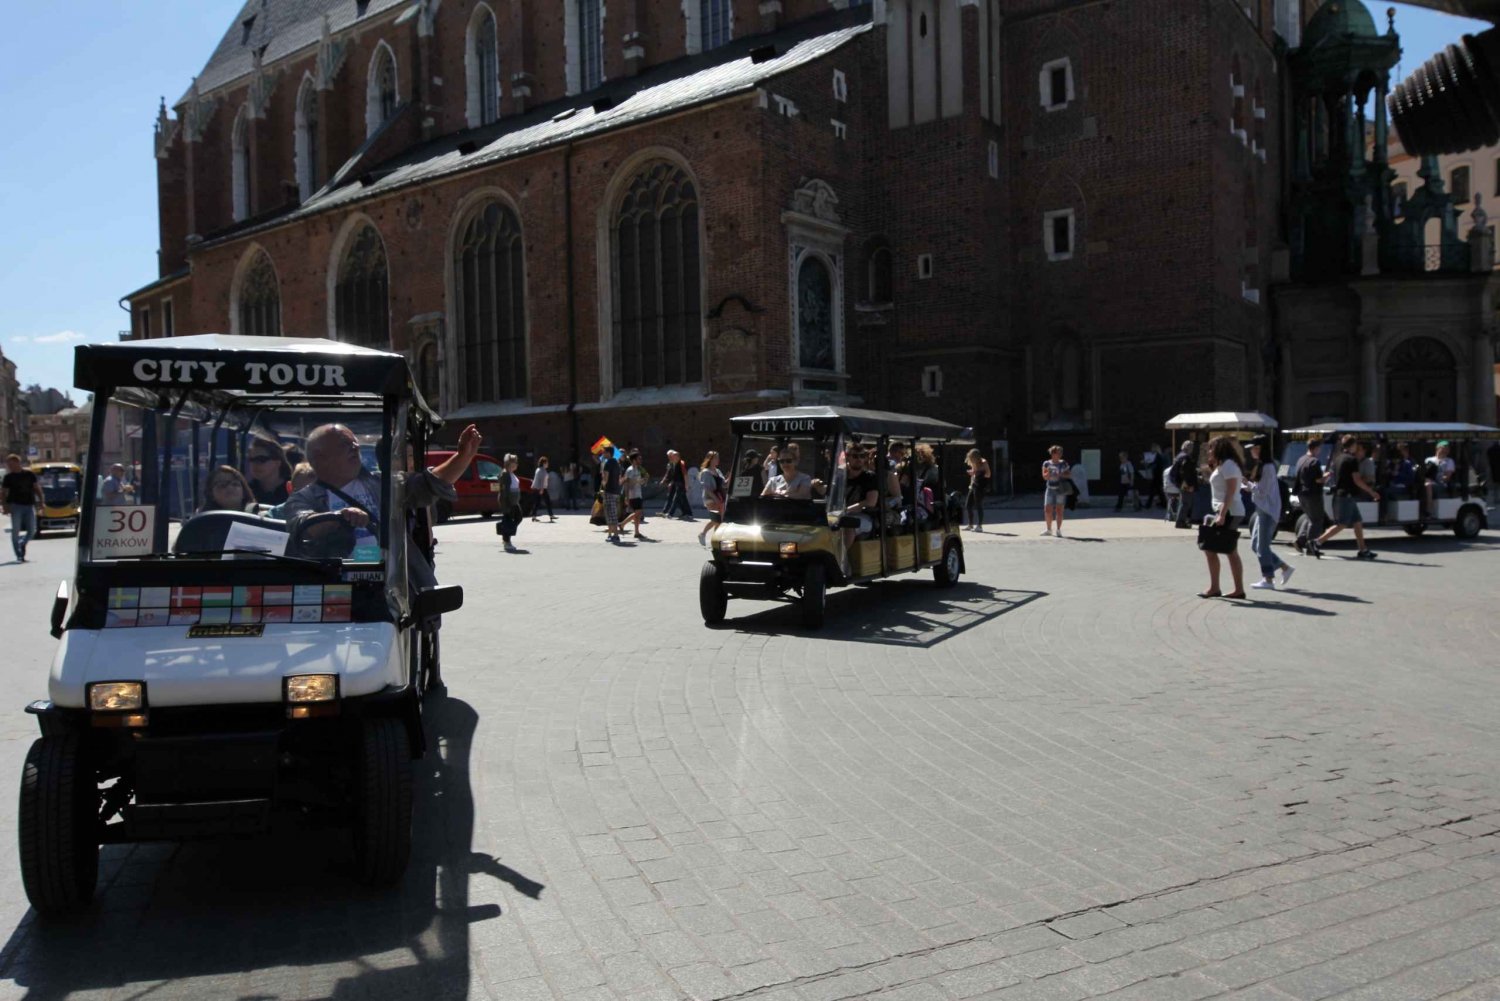 Krakow: Private Guided City Tour by Electric Car